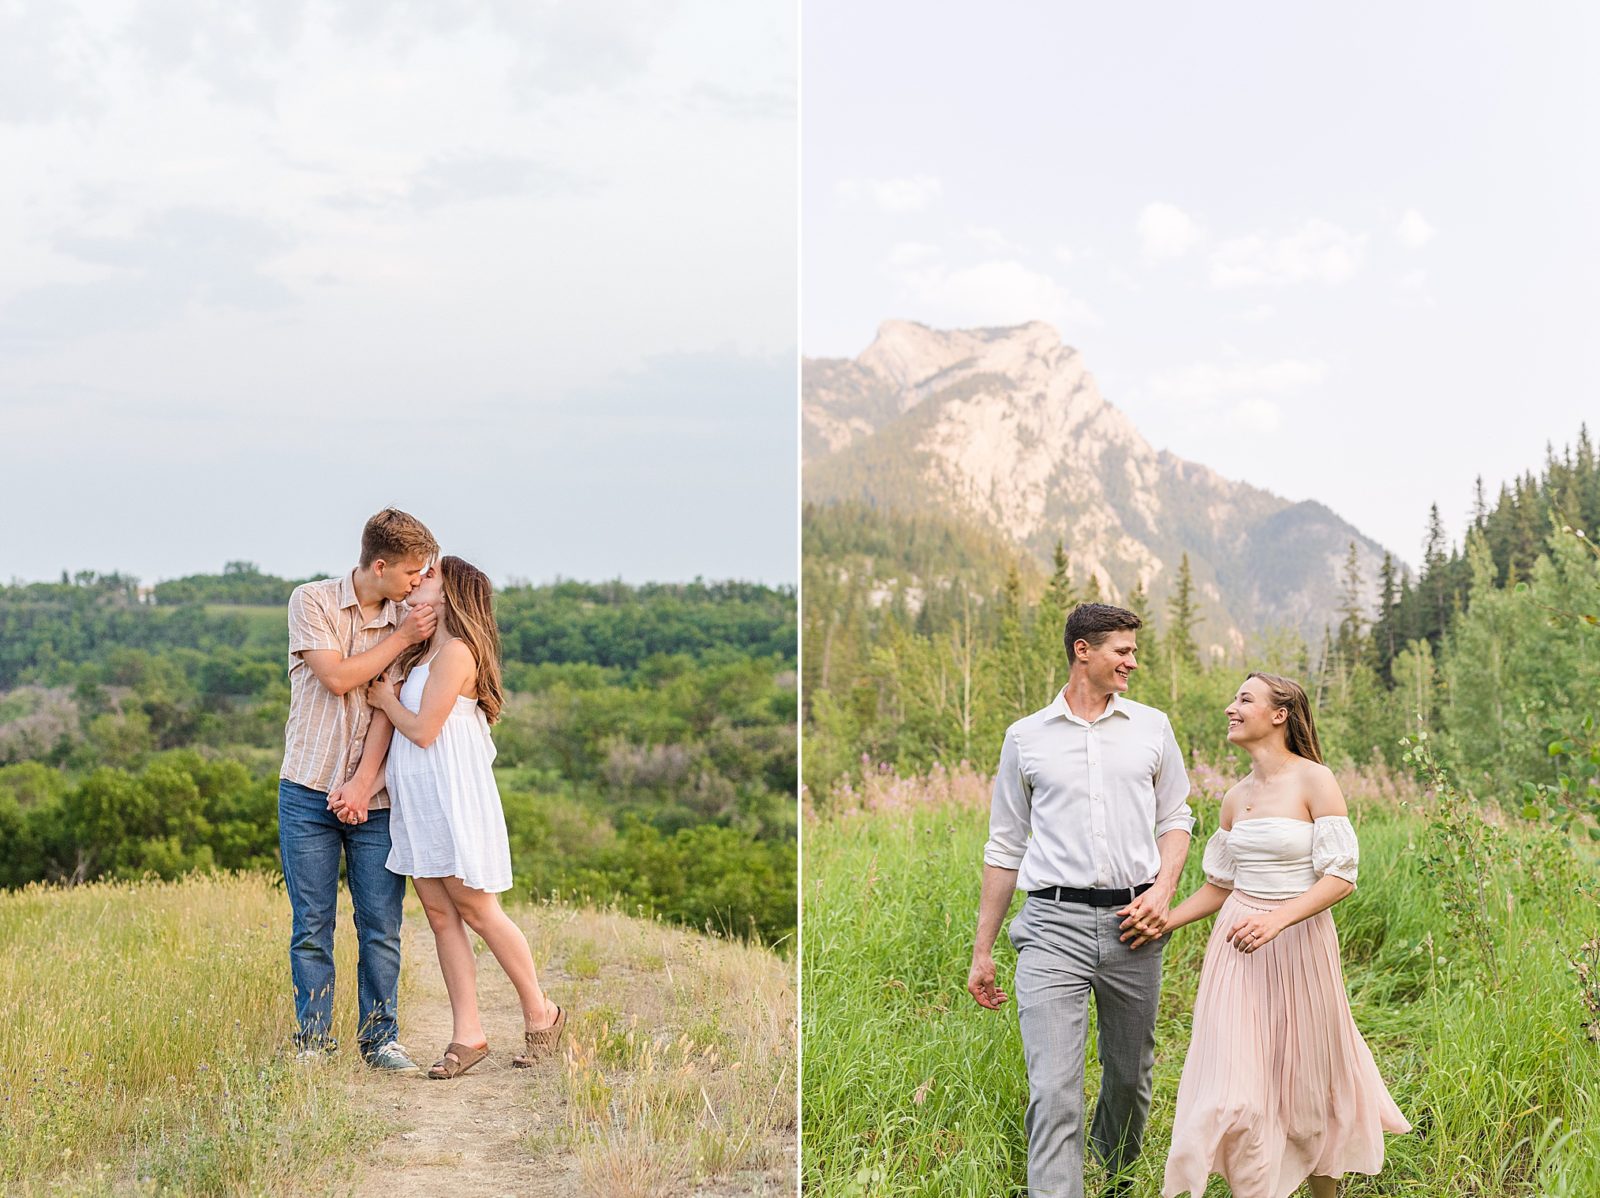 what to wear for couples photos - flowy dresses adding movement to photo